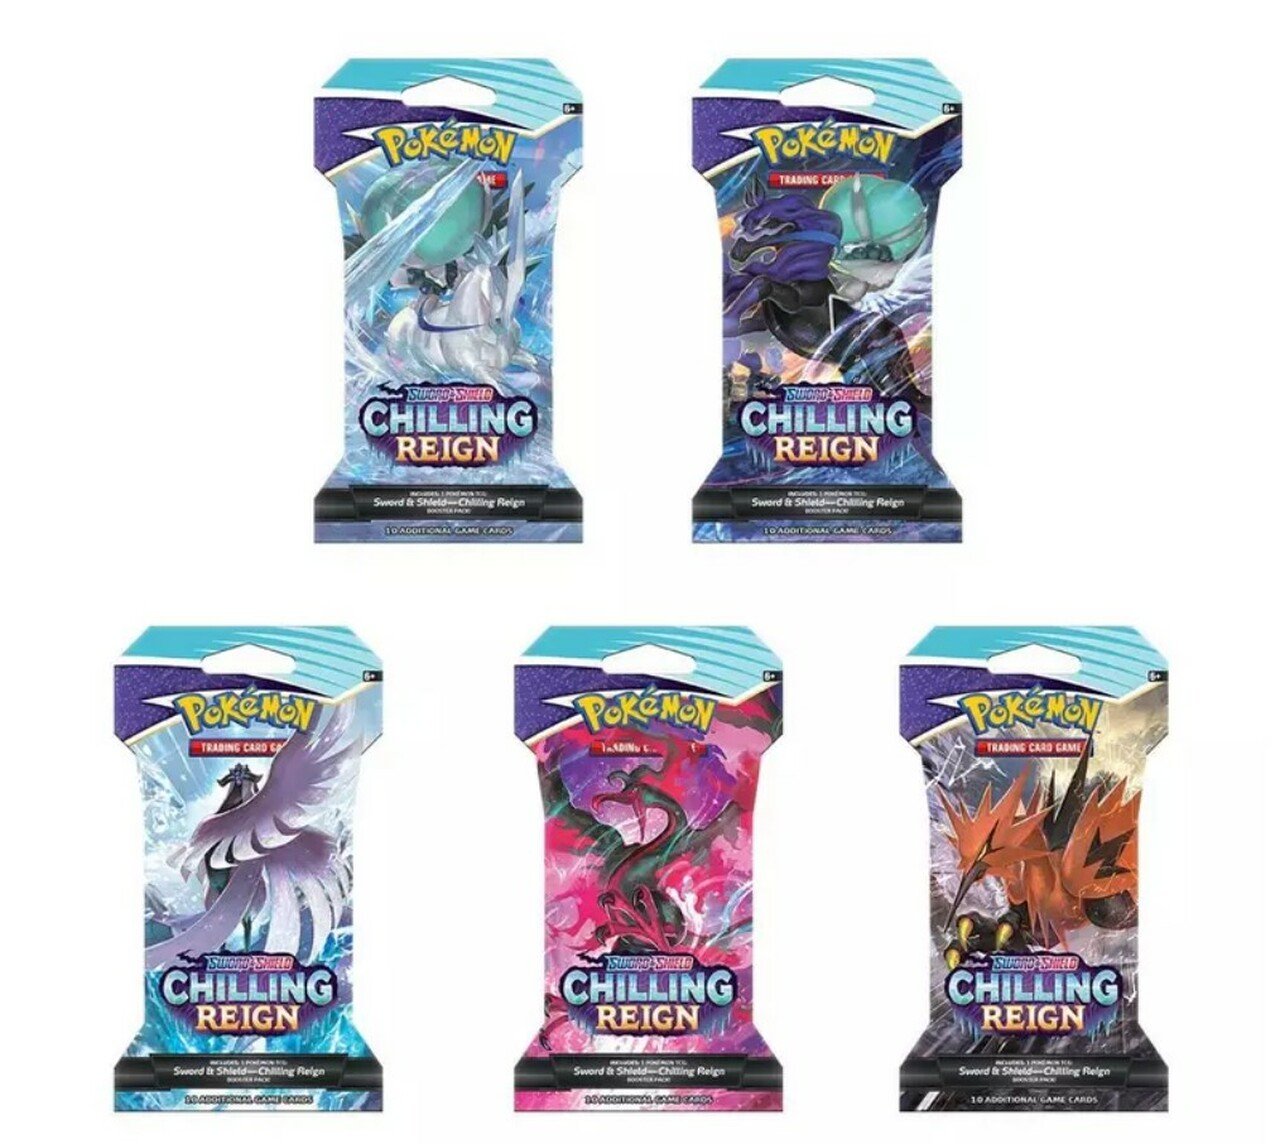 Pokemon Sword & Shield Chilling Reign Sleeved Booster Pack (24 packs a lot) - Miraj Trading